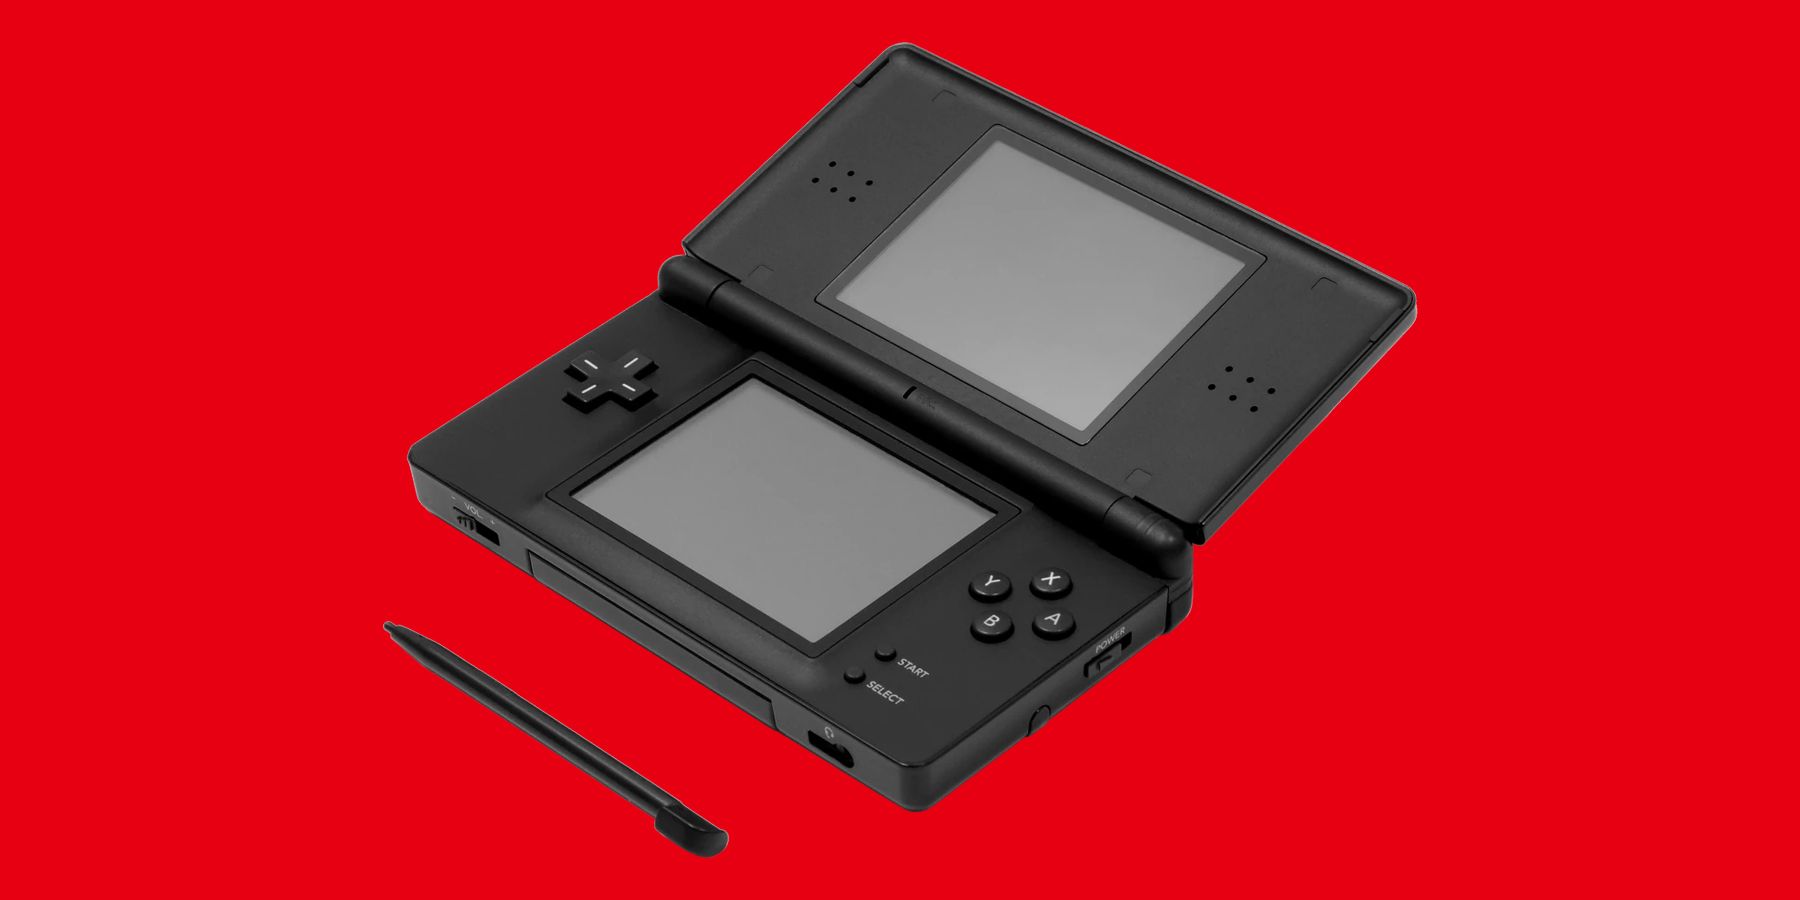 nintendo-ds-red-background